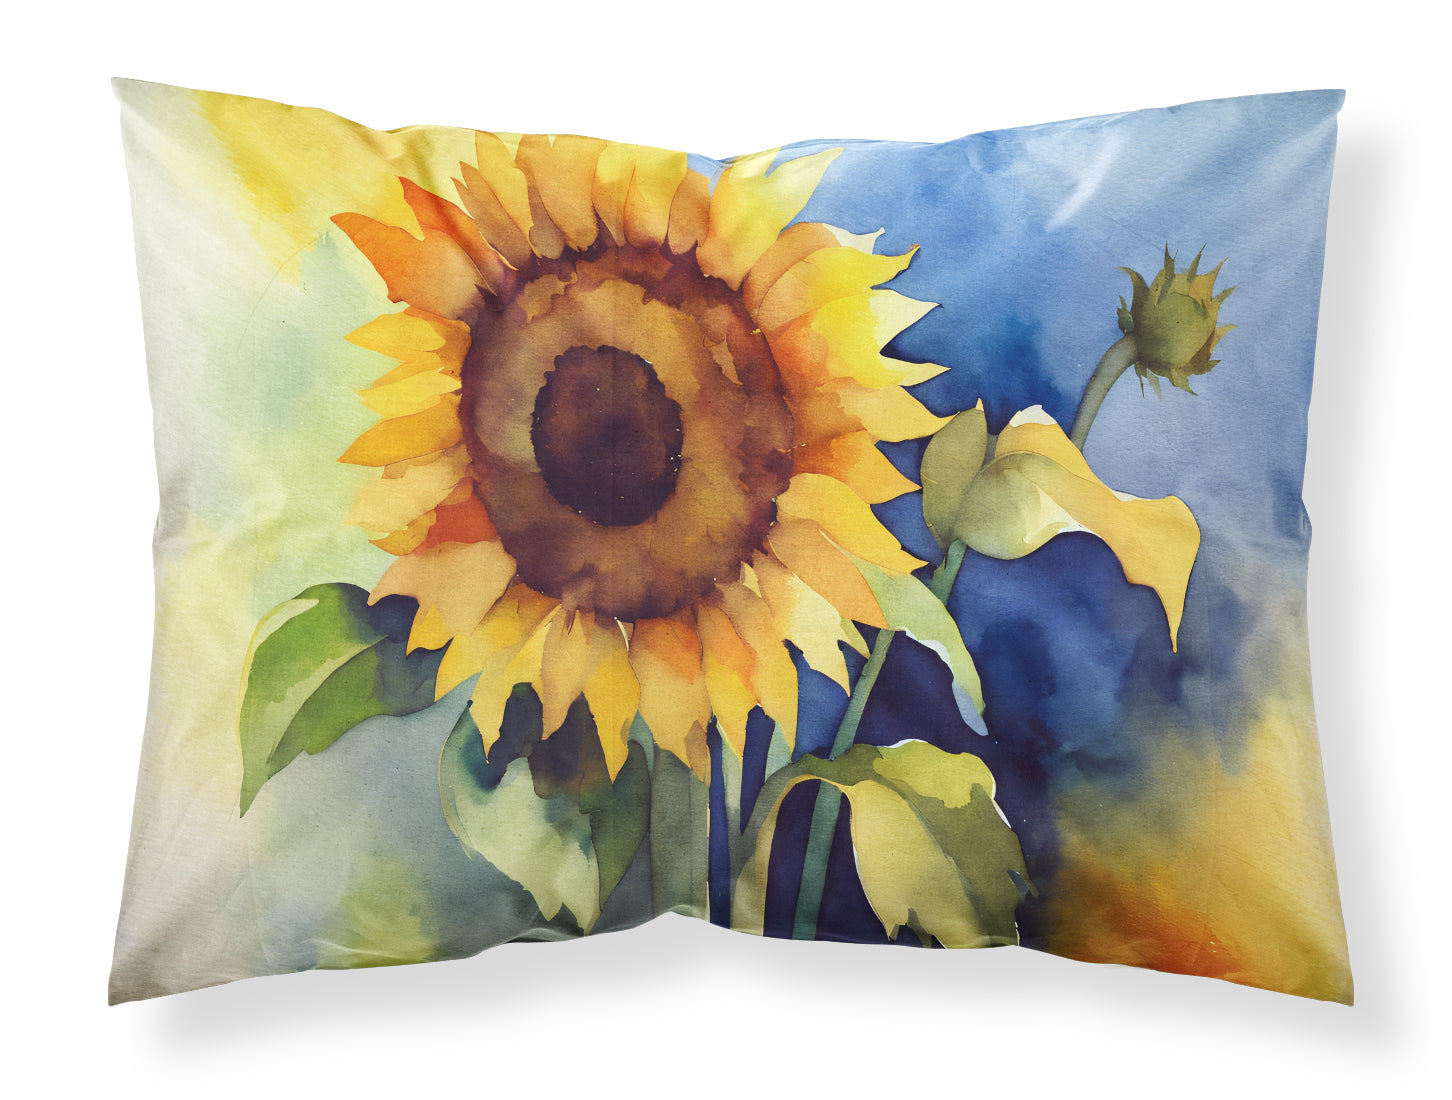 Buy this Sunflowers in Watercolor Fabric Standard Pillowcase